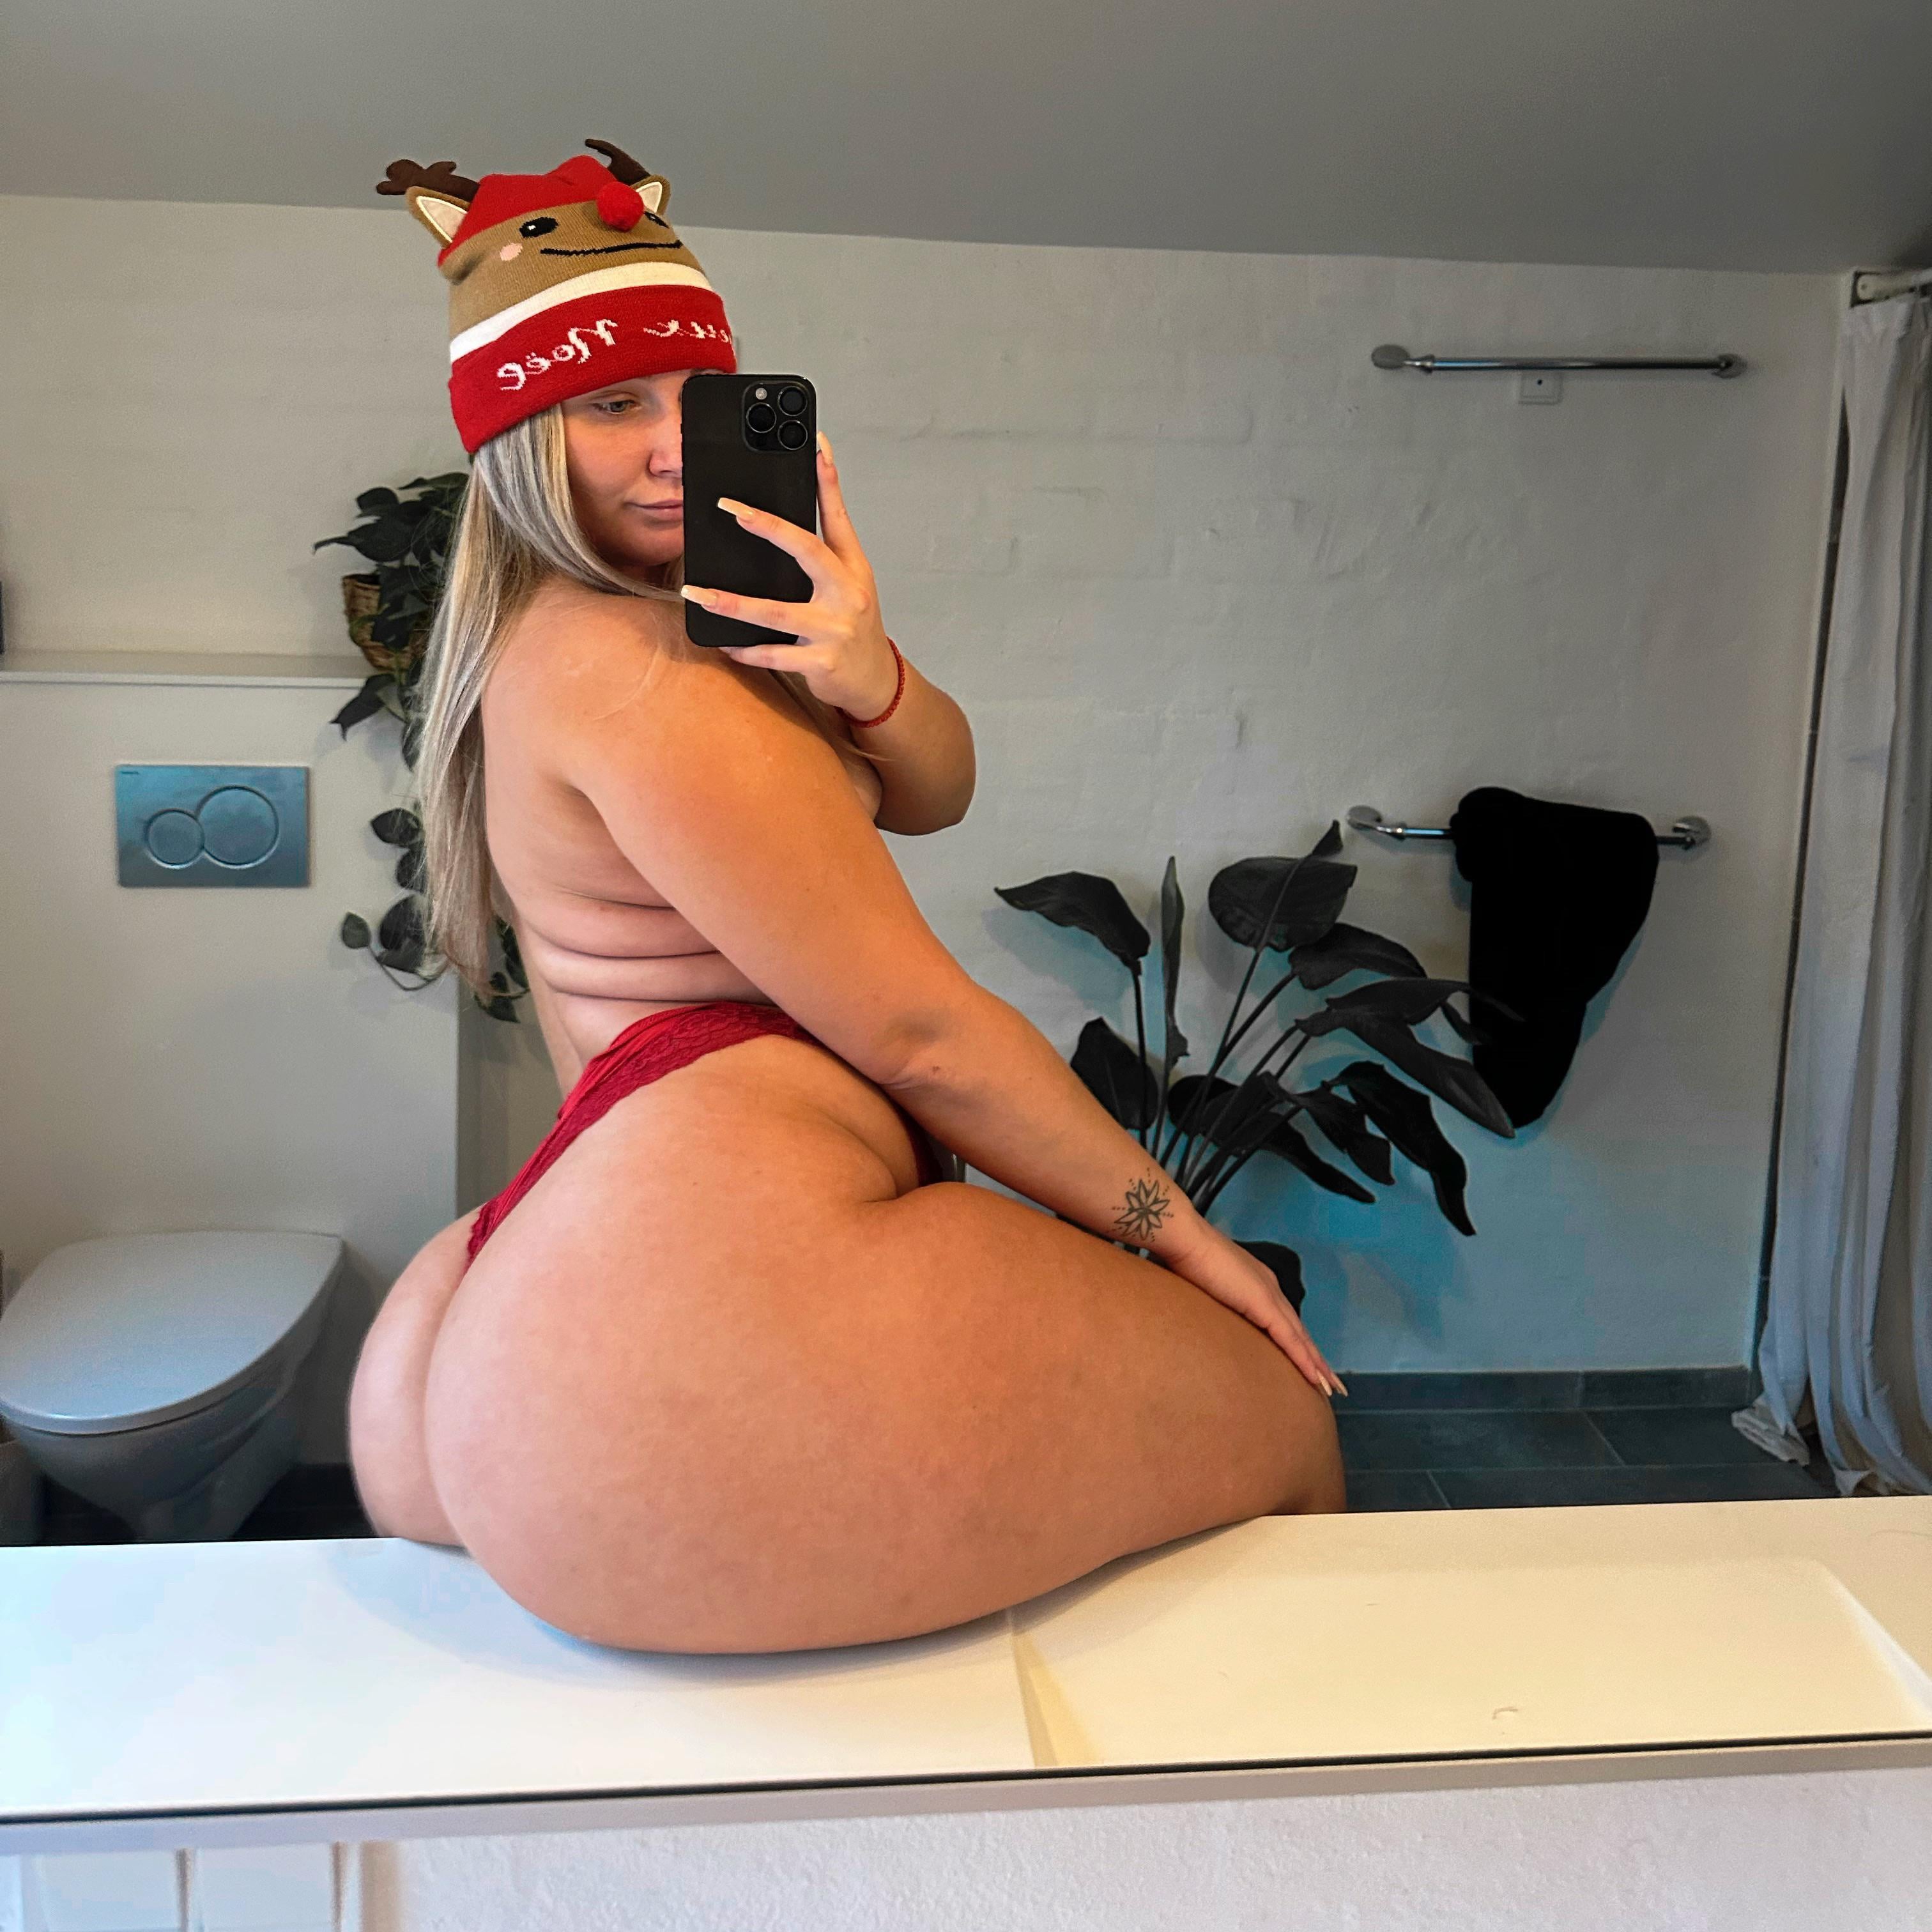 PAWG I got a gift for you